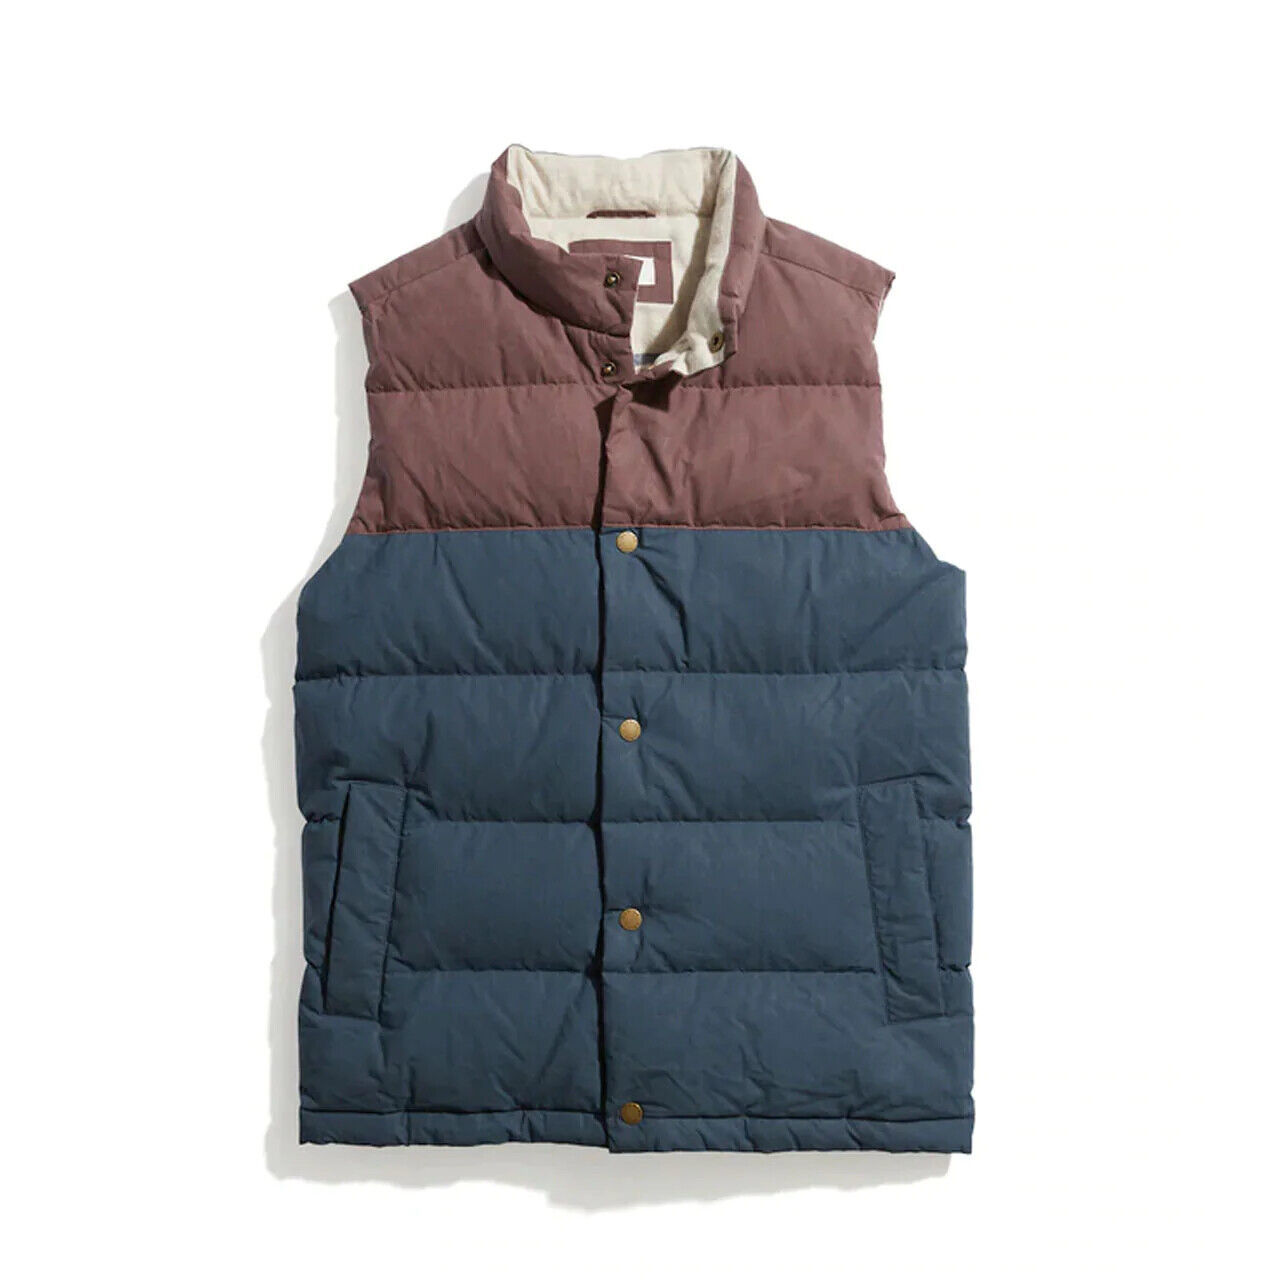 Primary image for Marine Layer Flannel-Lined Puffer Vest - Peppercorn/Midnight Navy, Small, Large